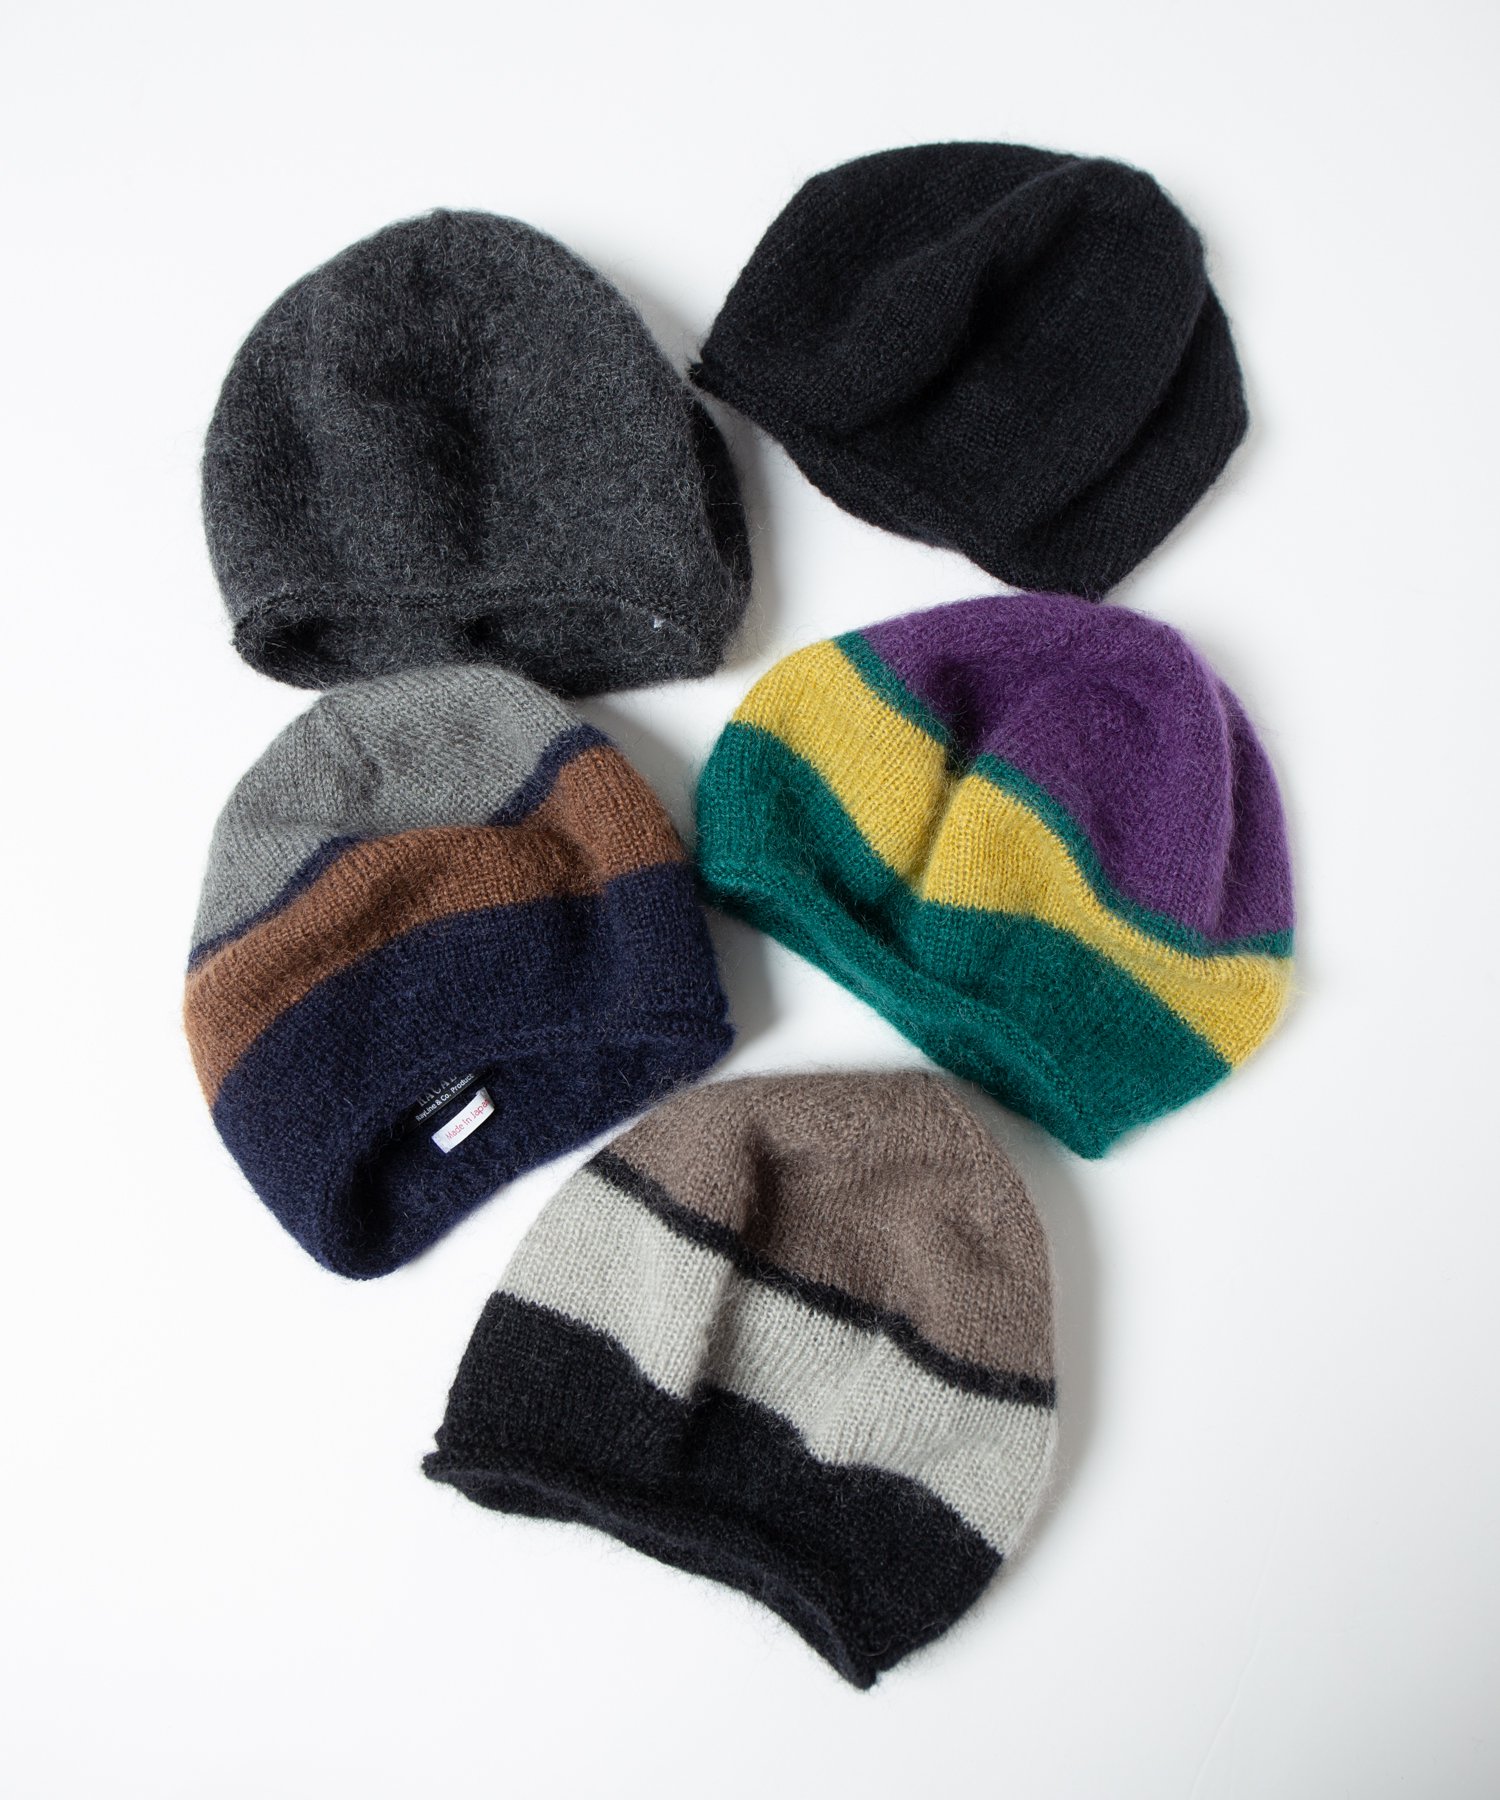 <img class='new_mark_img1' src='https://img.shop-pro.jp/img/new/icons15.gif' style='border:none;display:inline;margin:0px;padding:0px;width:auto;' />【Racal】 Mohair knit tamberet / モヘアニットタムベレー